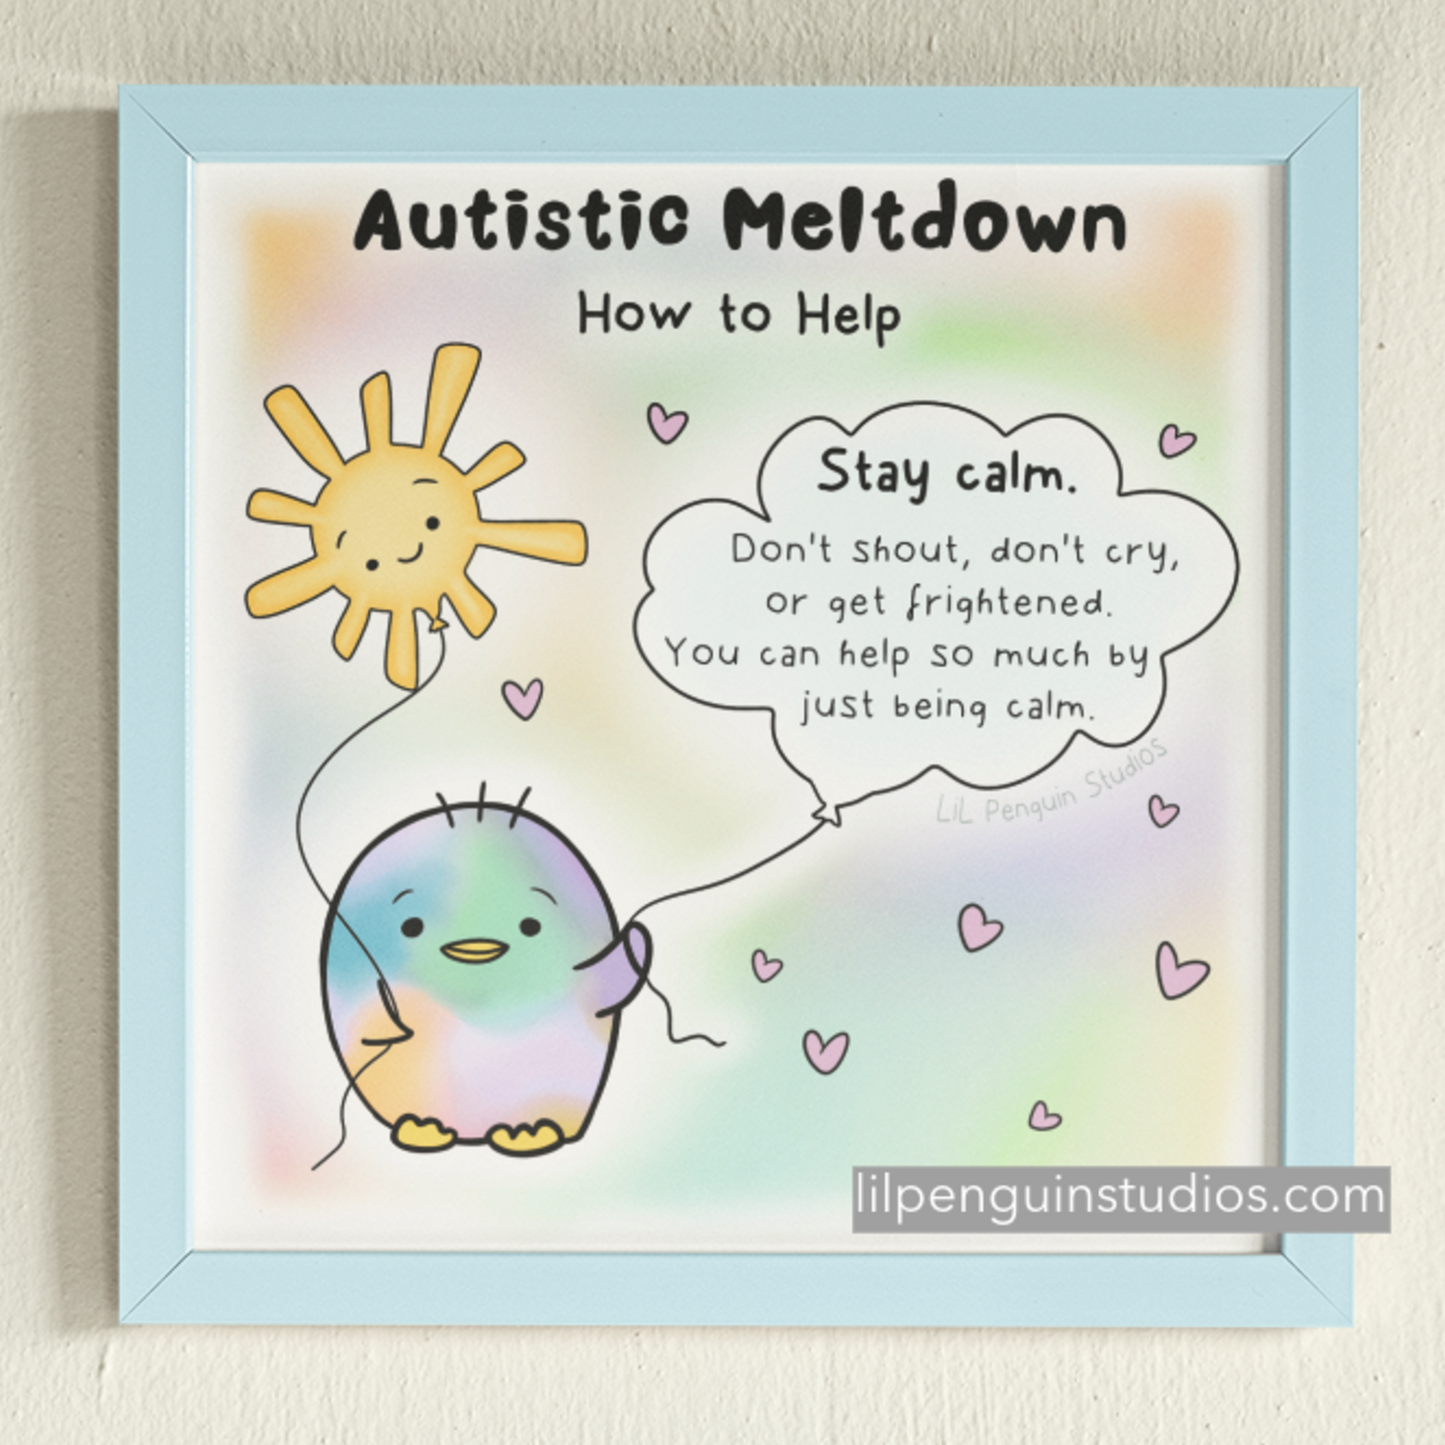 Autistic Meltdown, How to Help printable bundle with 2 worksheets. With Private Practice licence.